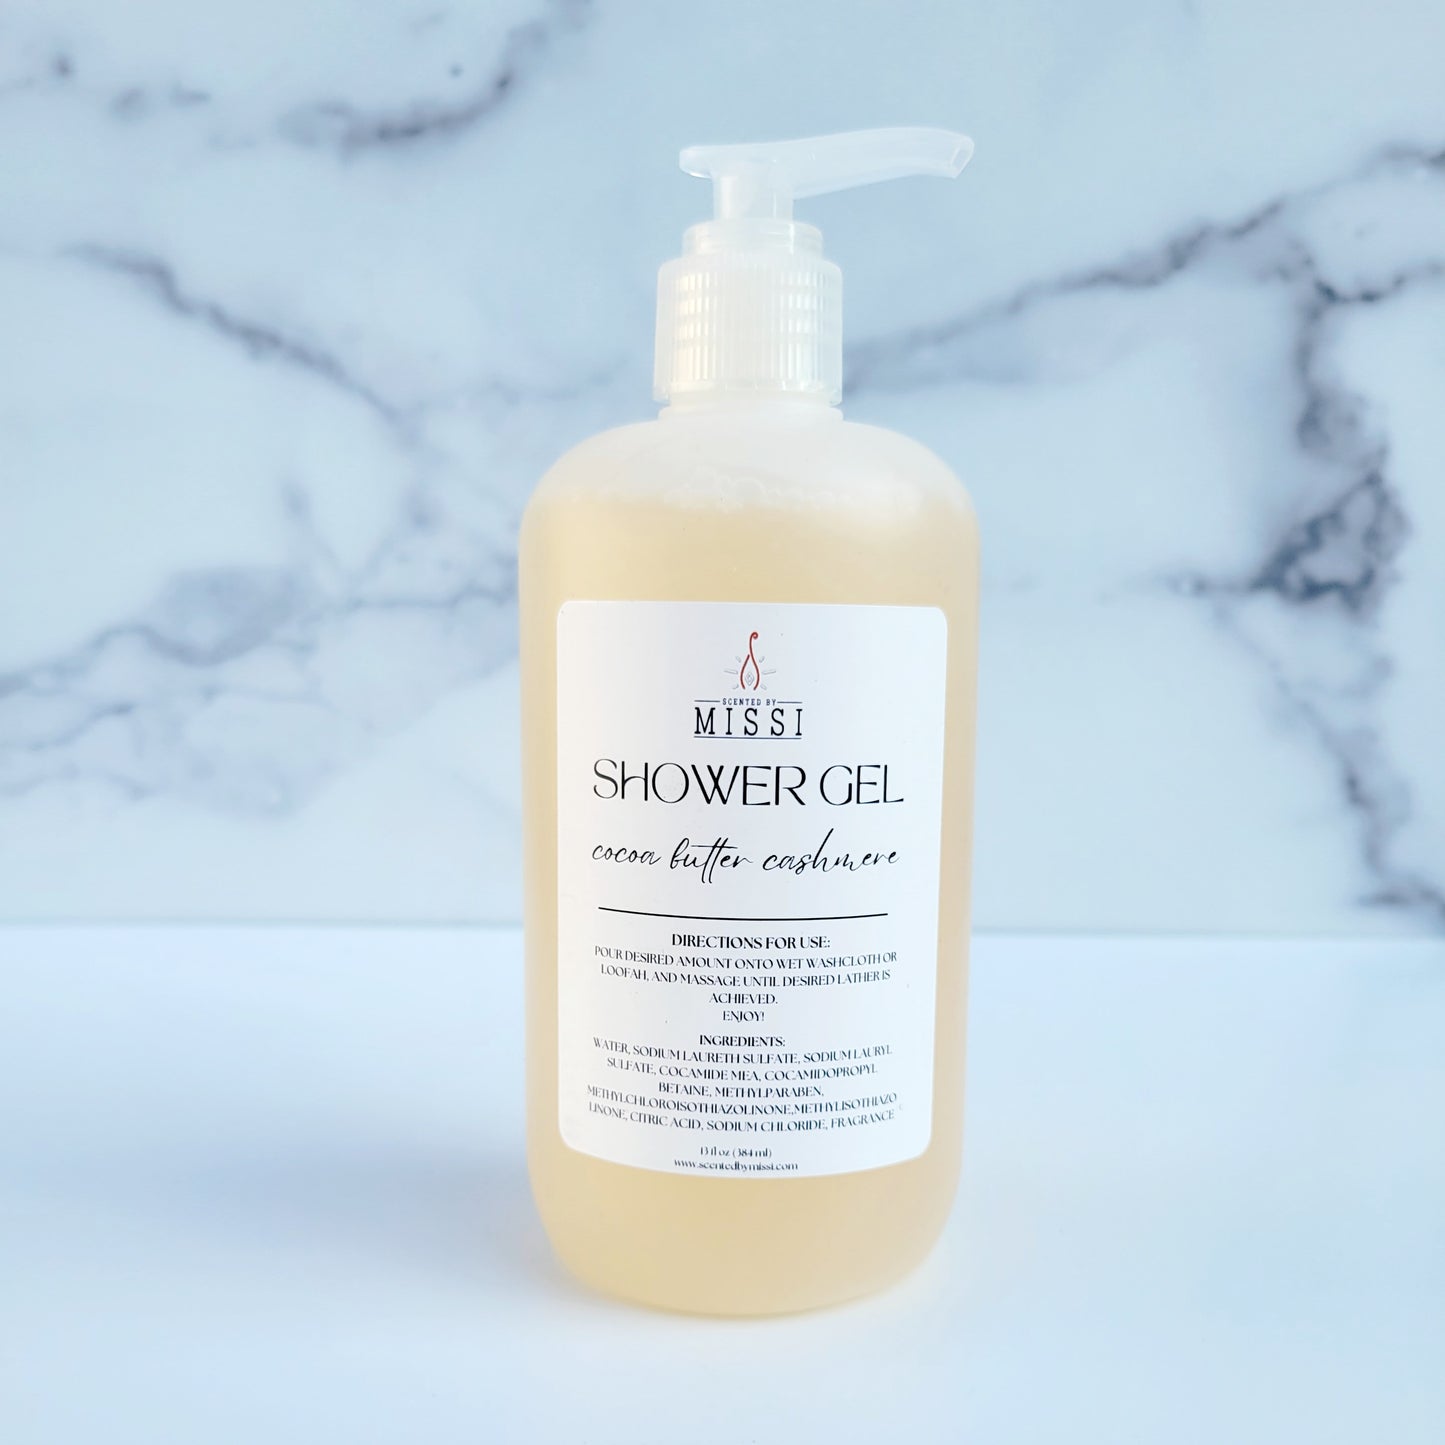 Cocoa Butter Cashmere Shower Gel